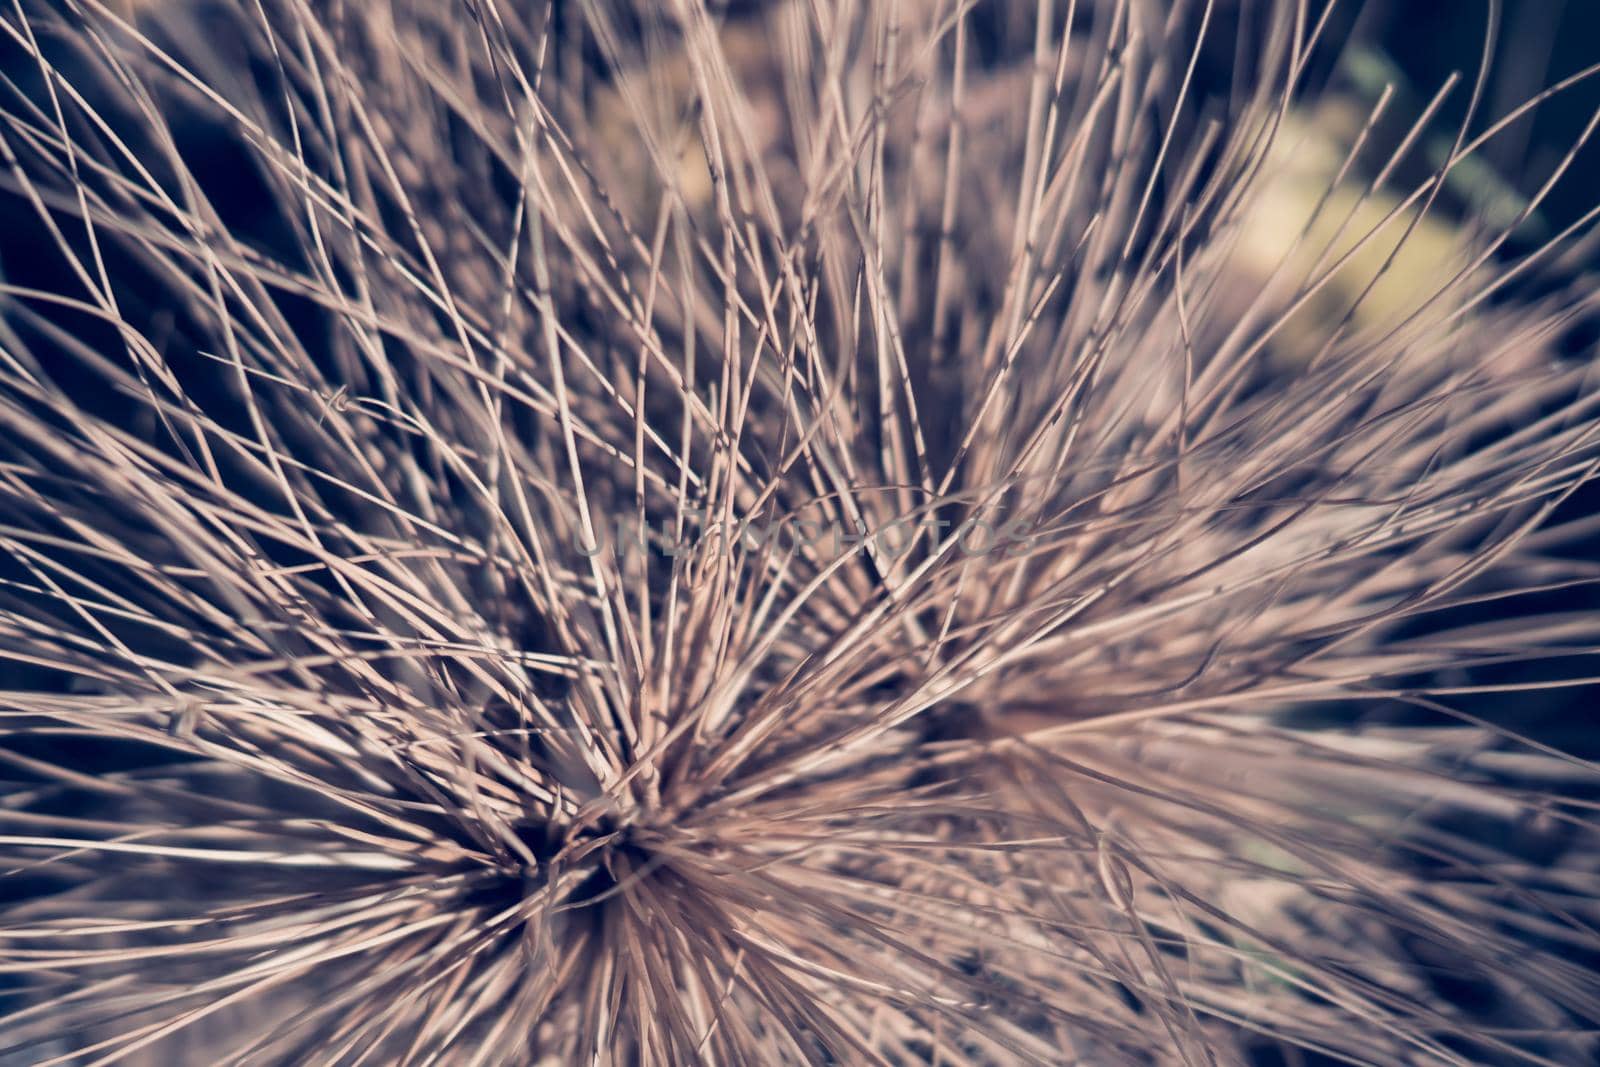 Abstract real photo nature beauty background. Macro dry tropical long needles thorns branch plant grass looks like firework. Decor element ideas. Blue brown sun tone. More color in stock.